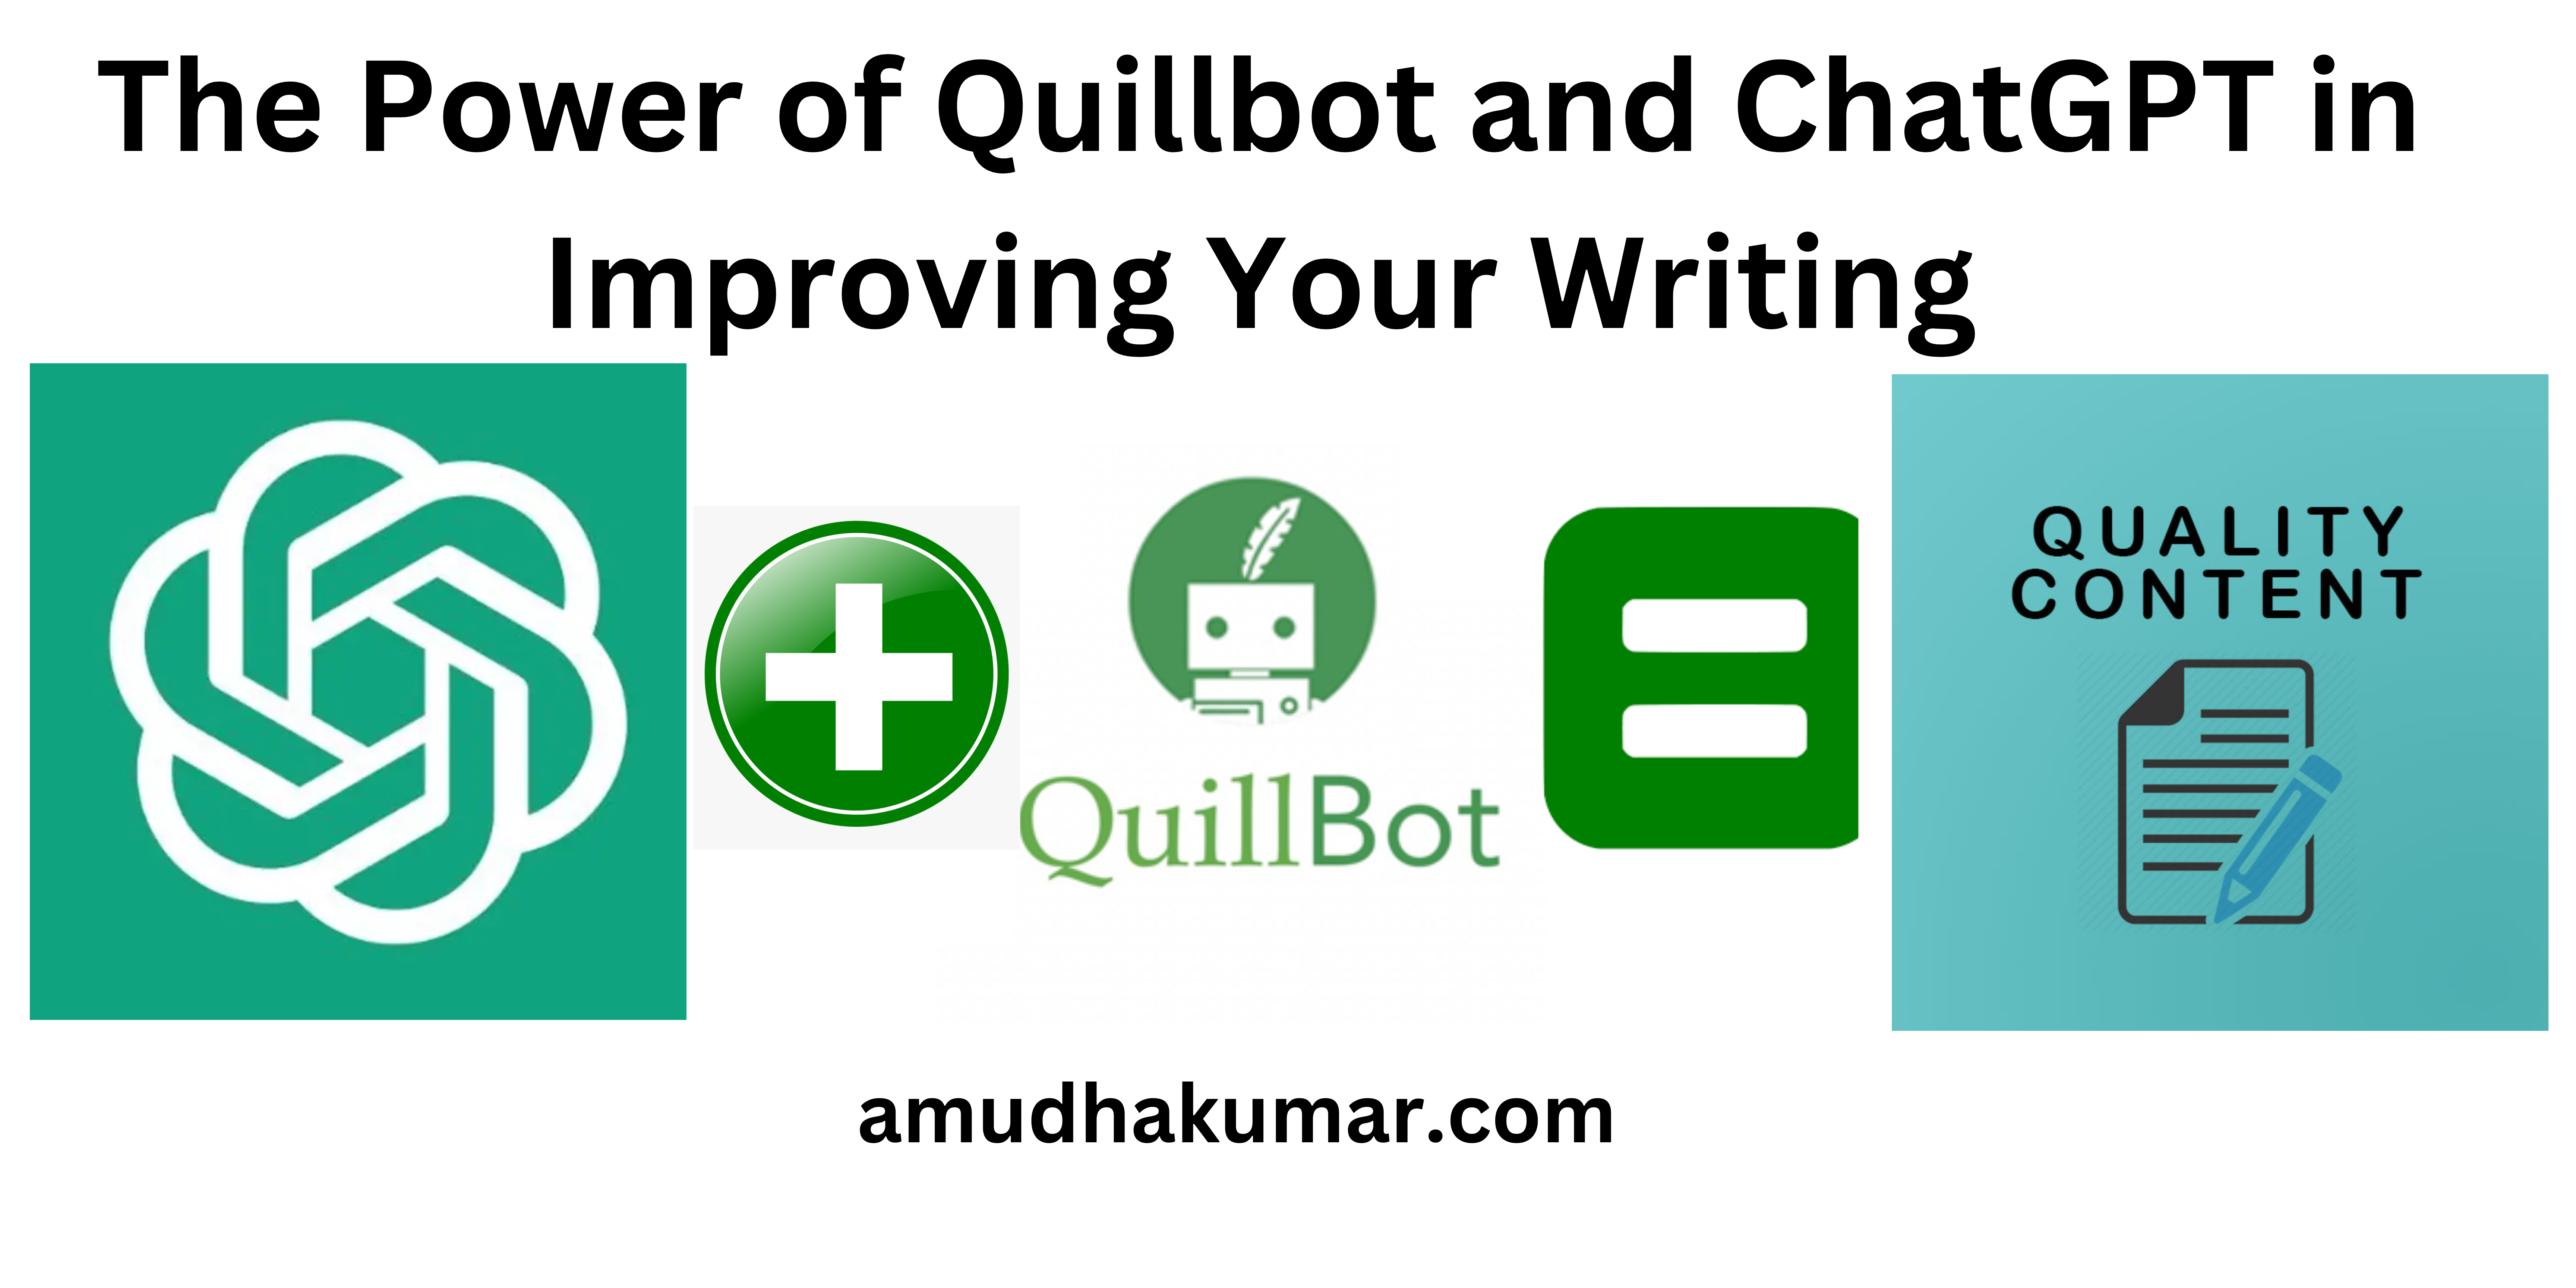 The Power of Quillbot and ChatGPT in Improving Your Writing